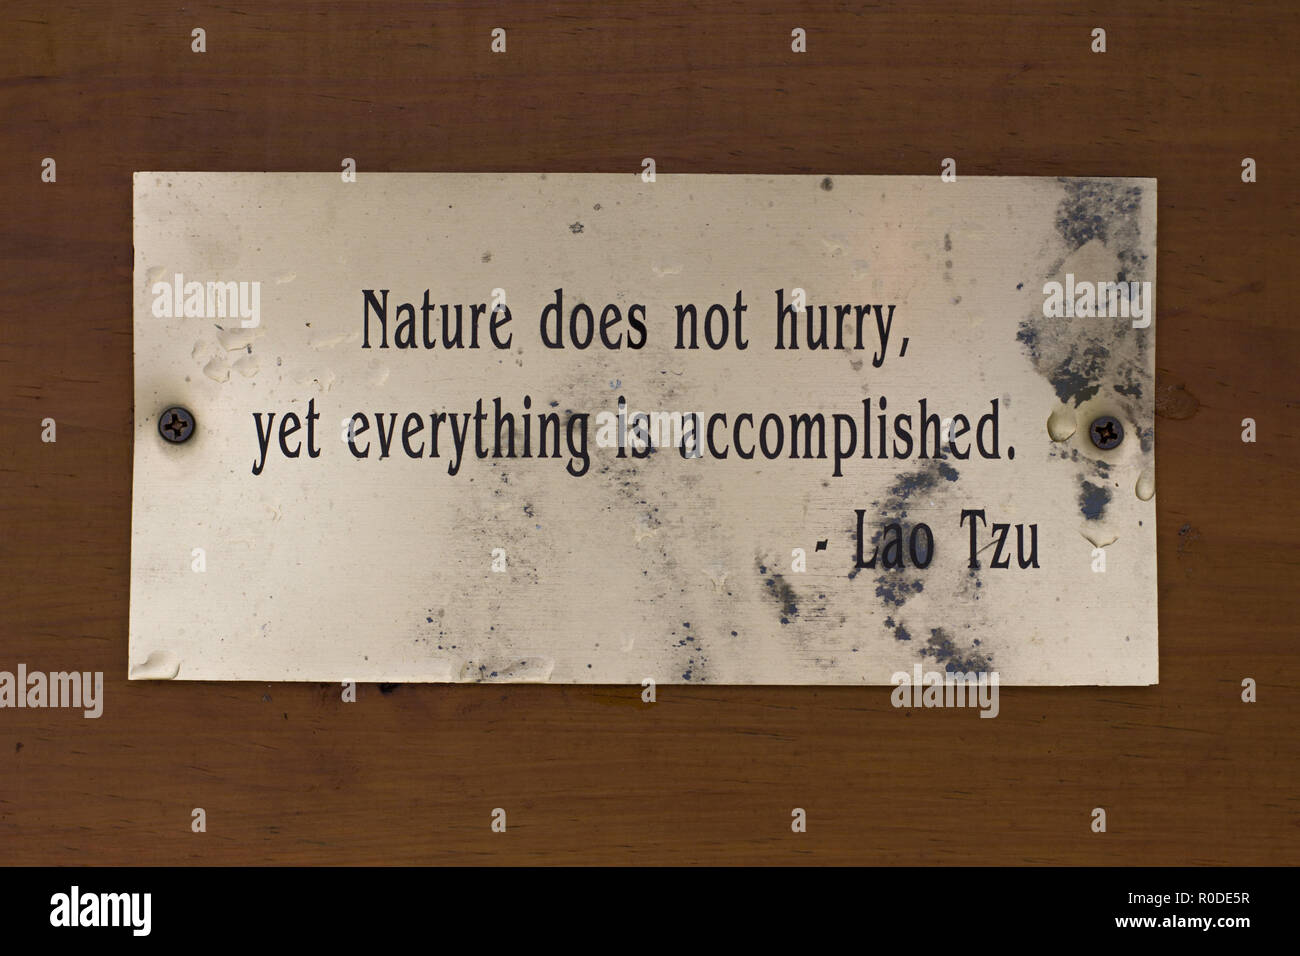 Nature does not hurry, yet everything is accomplished -- quote by ancient Chinese philosopher Lazoi / Lao Tzu / Lao Tze on a metal plaque Stock Photo